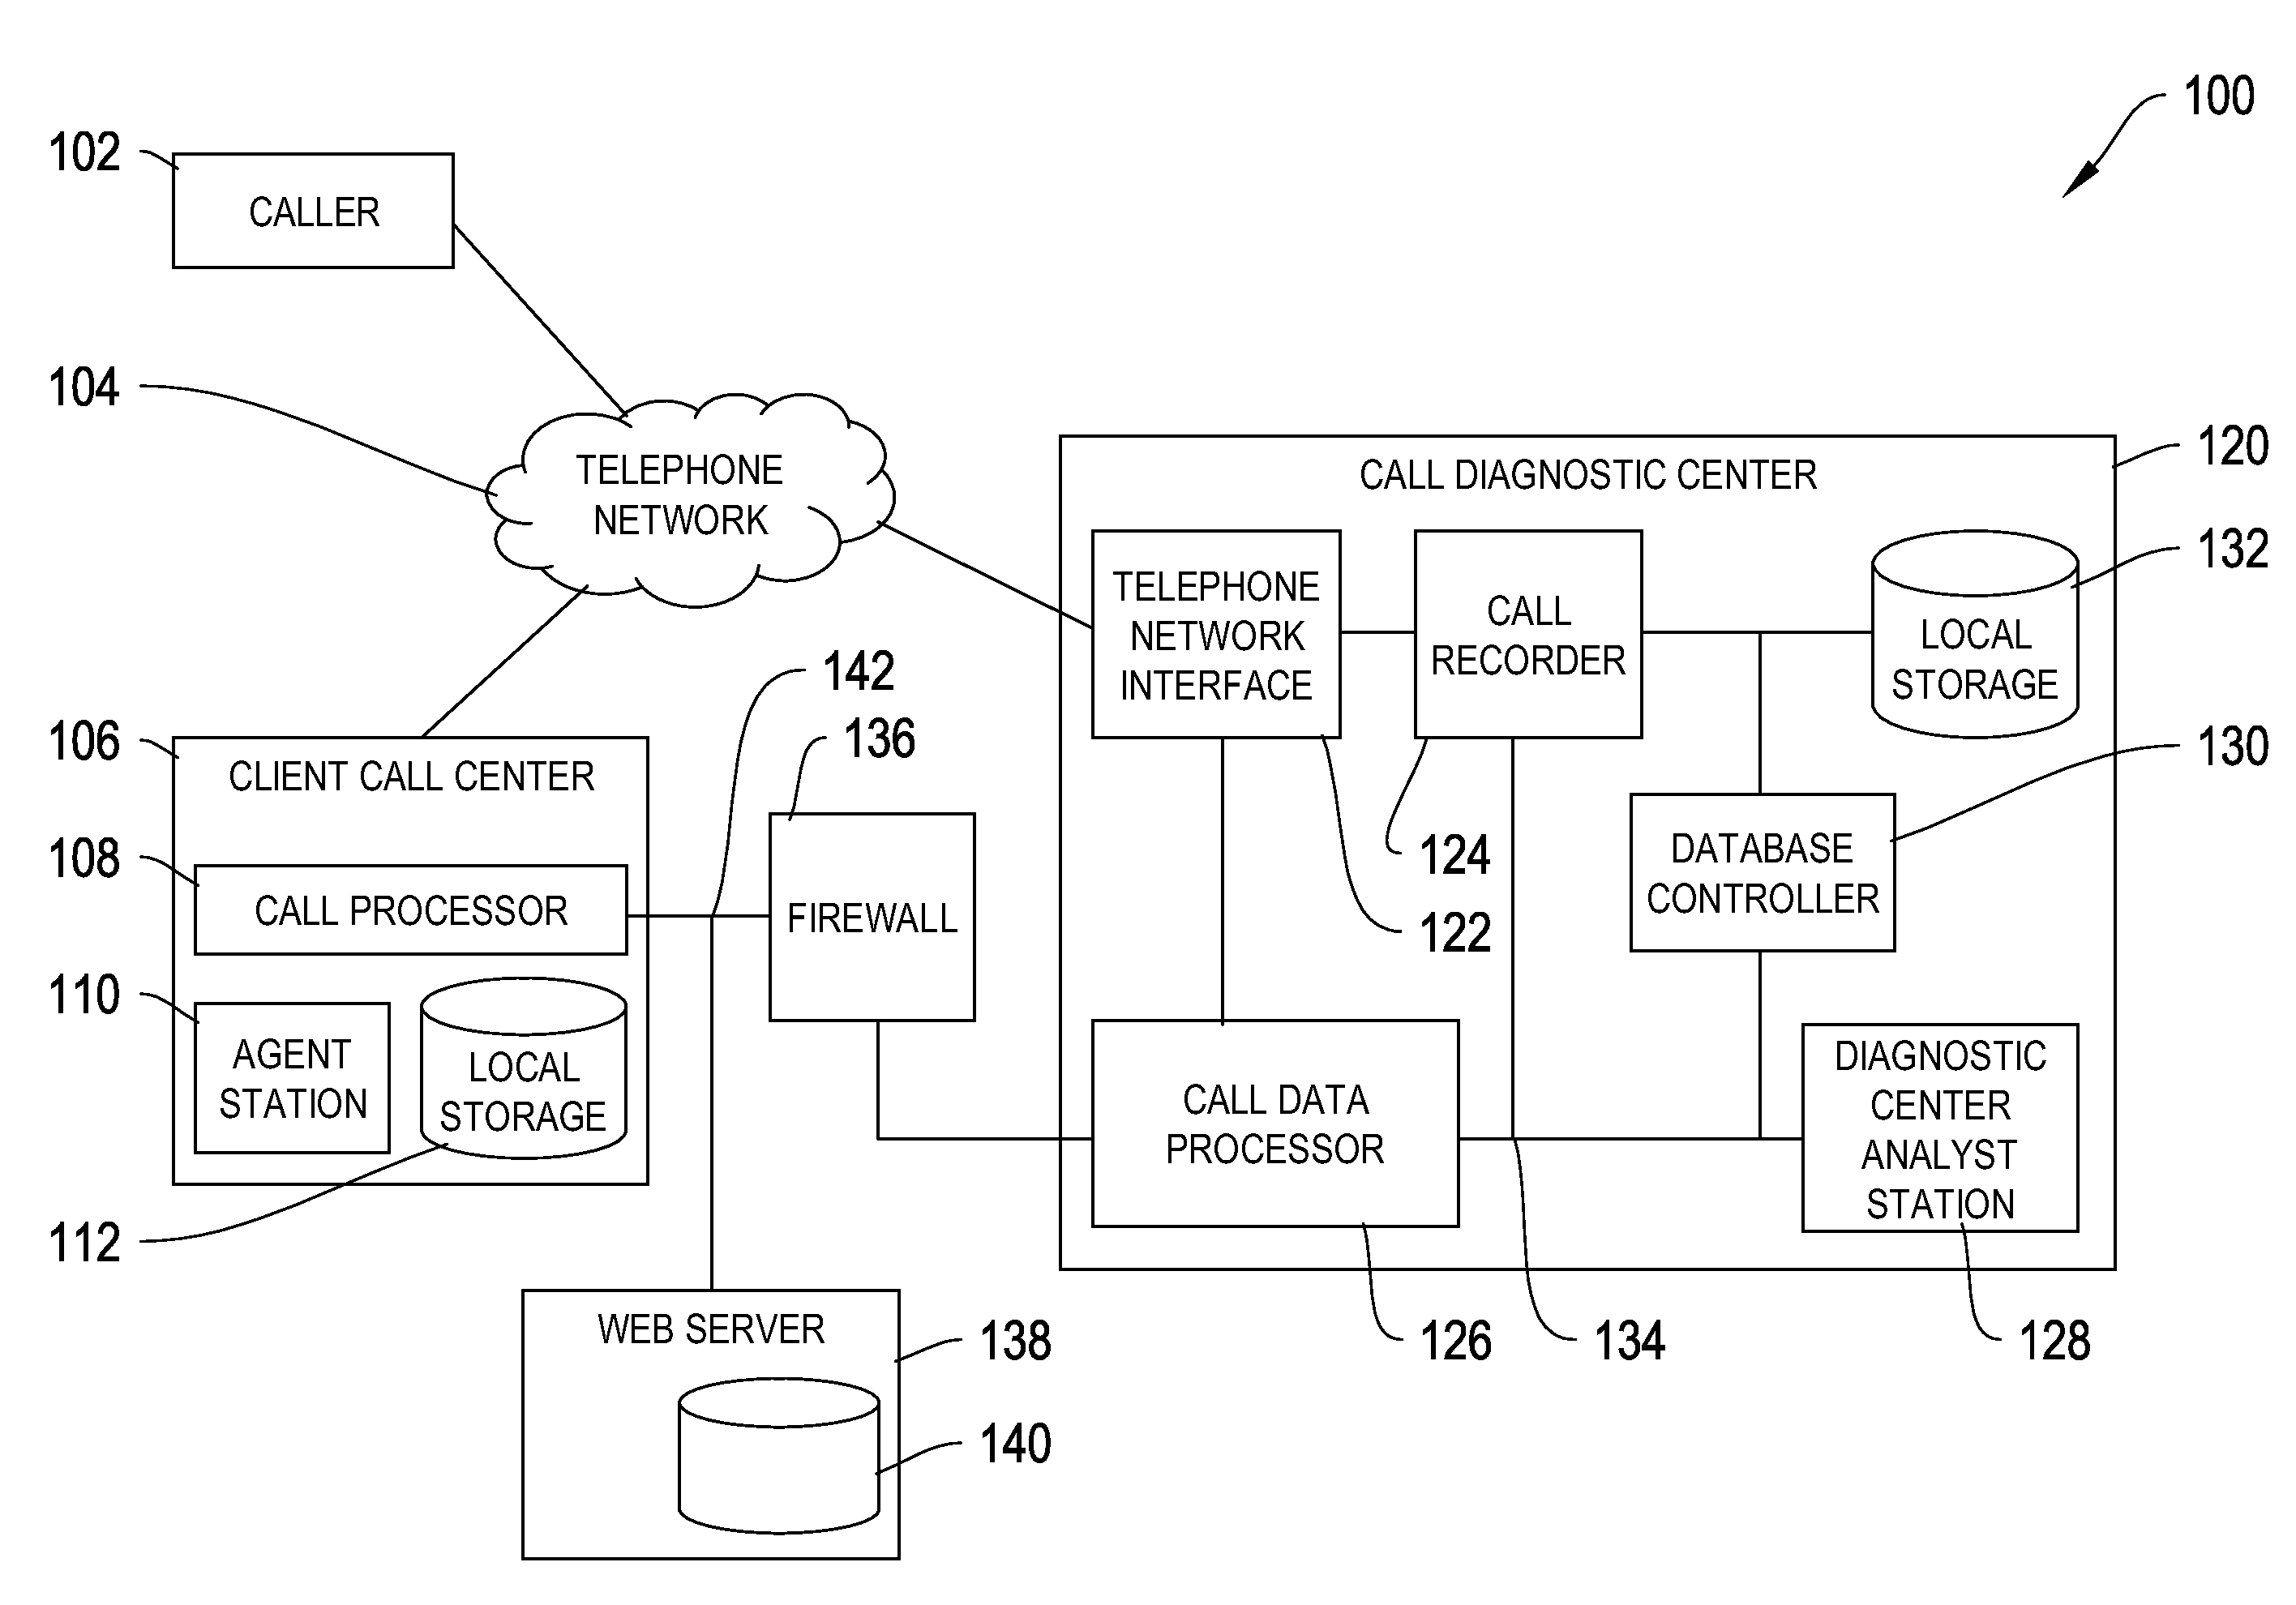 System and method for removing sensitive data from a recording